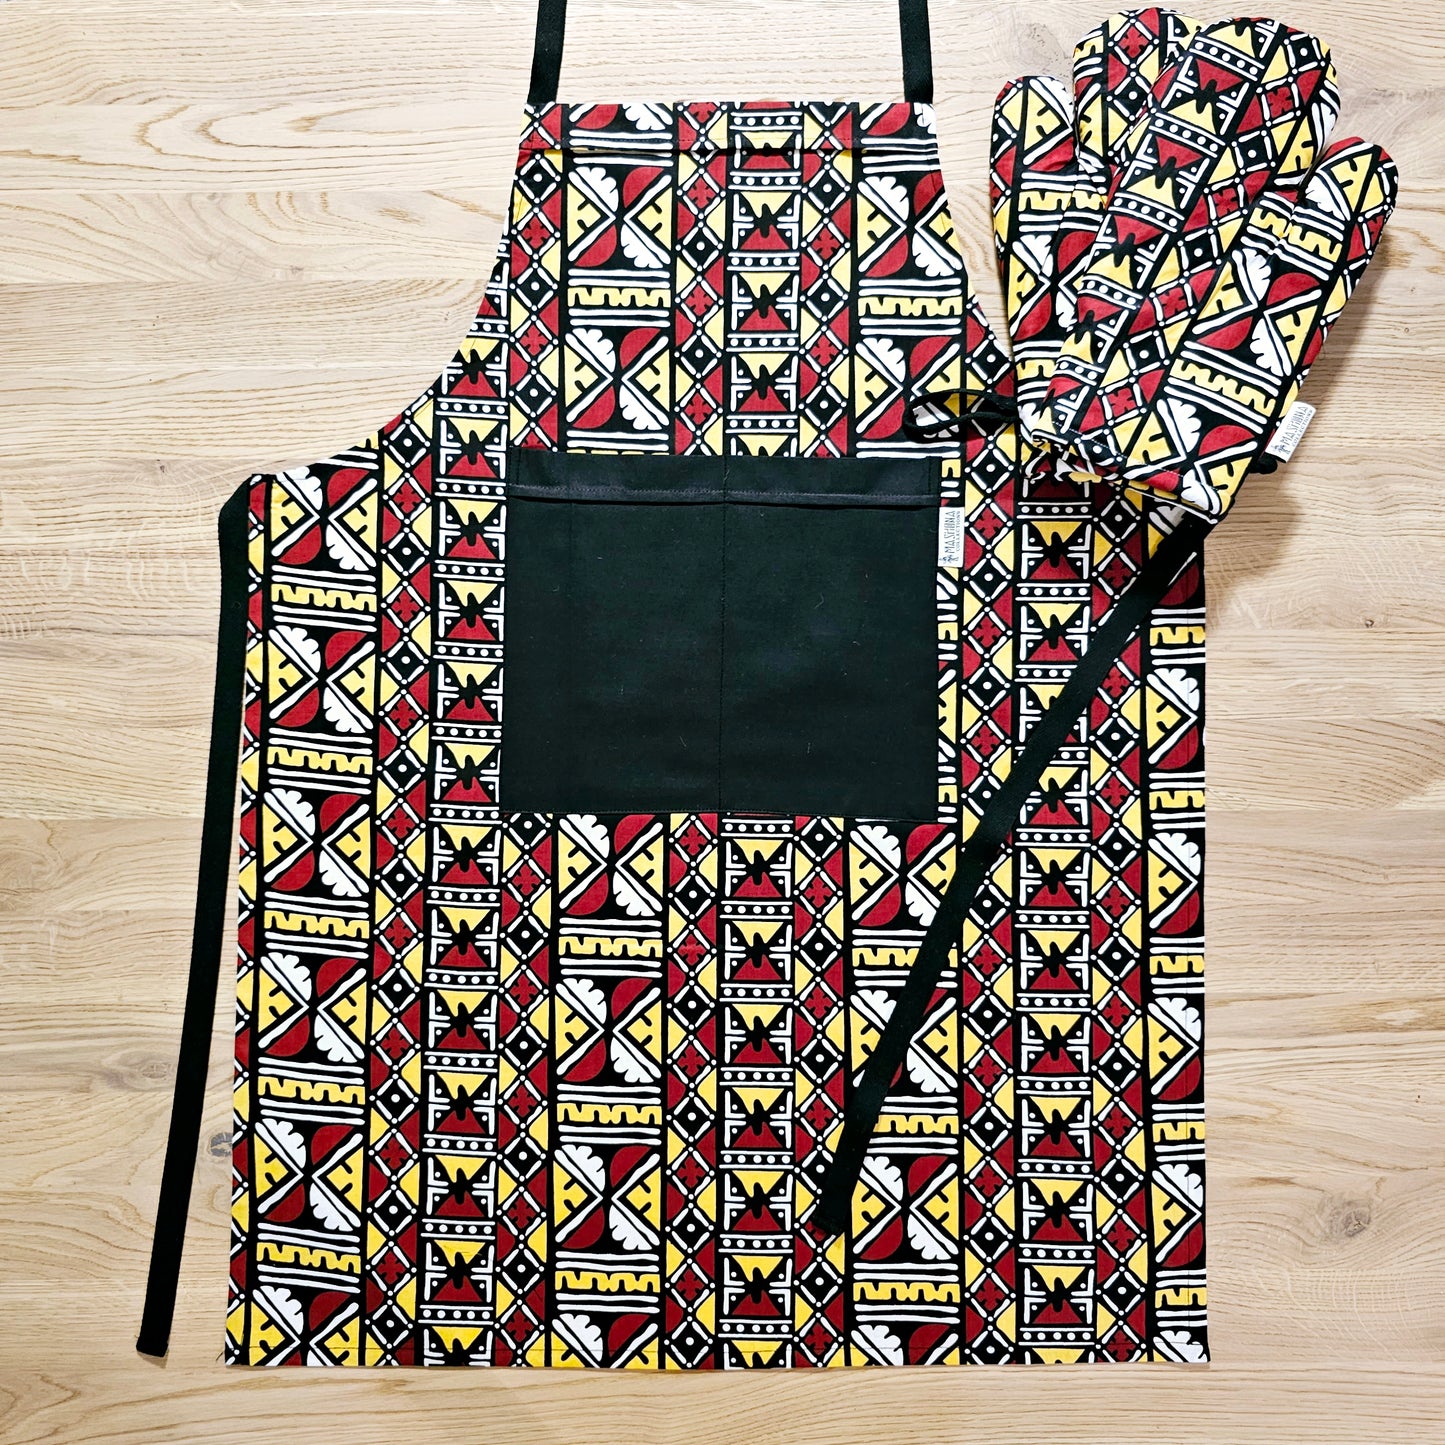 Handmade Apron and Matching Oven Gloves Set